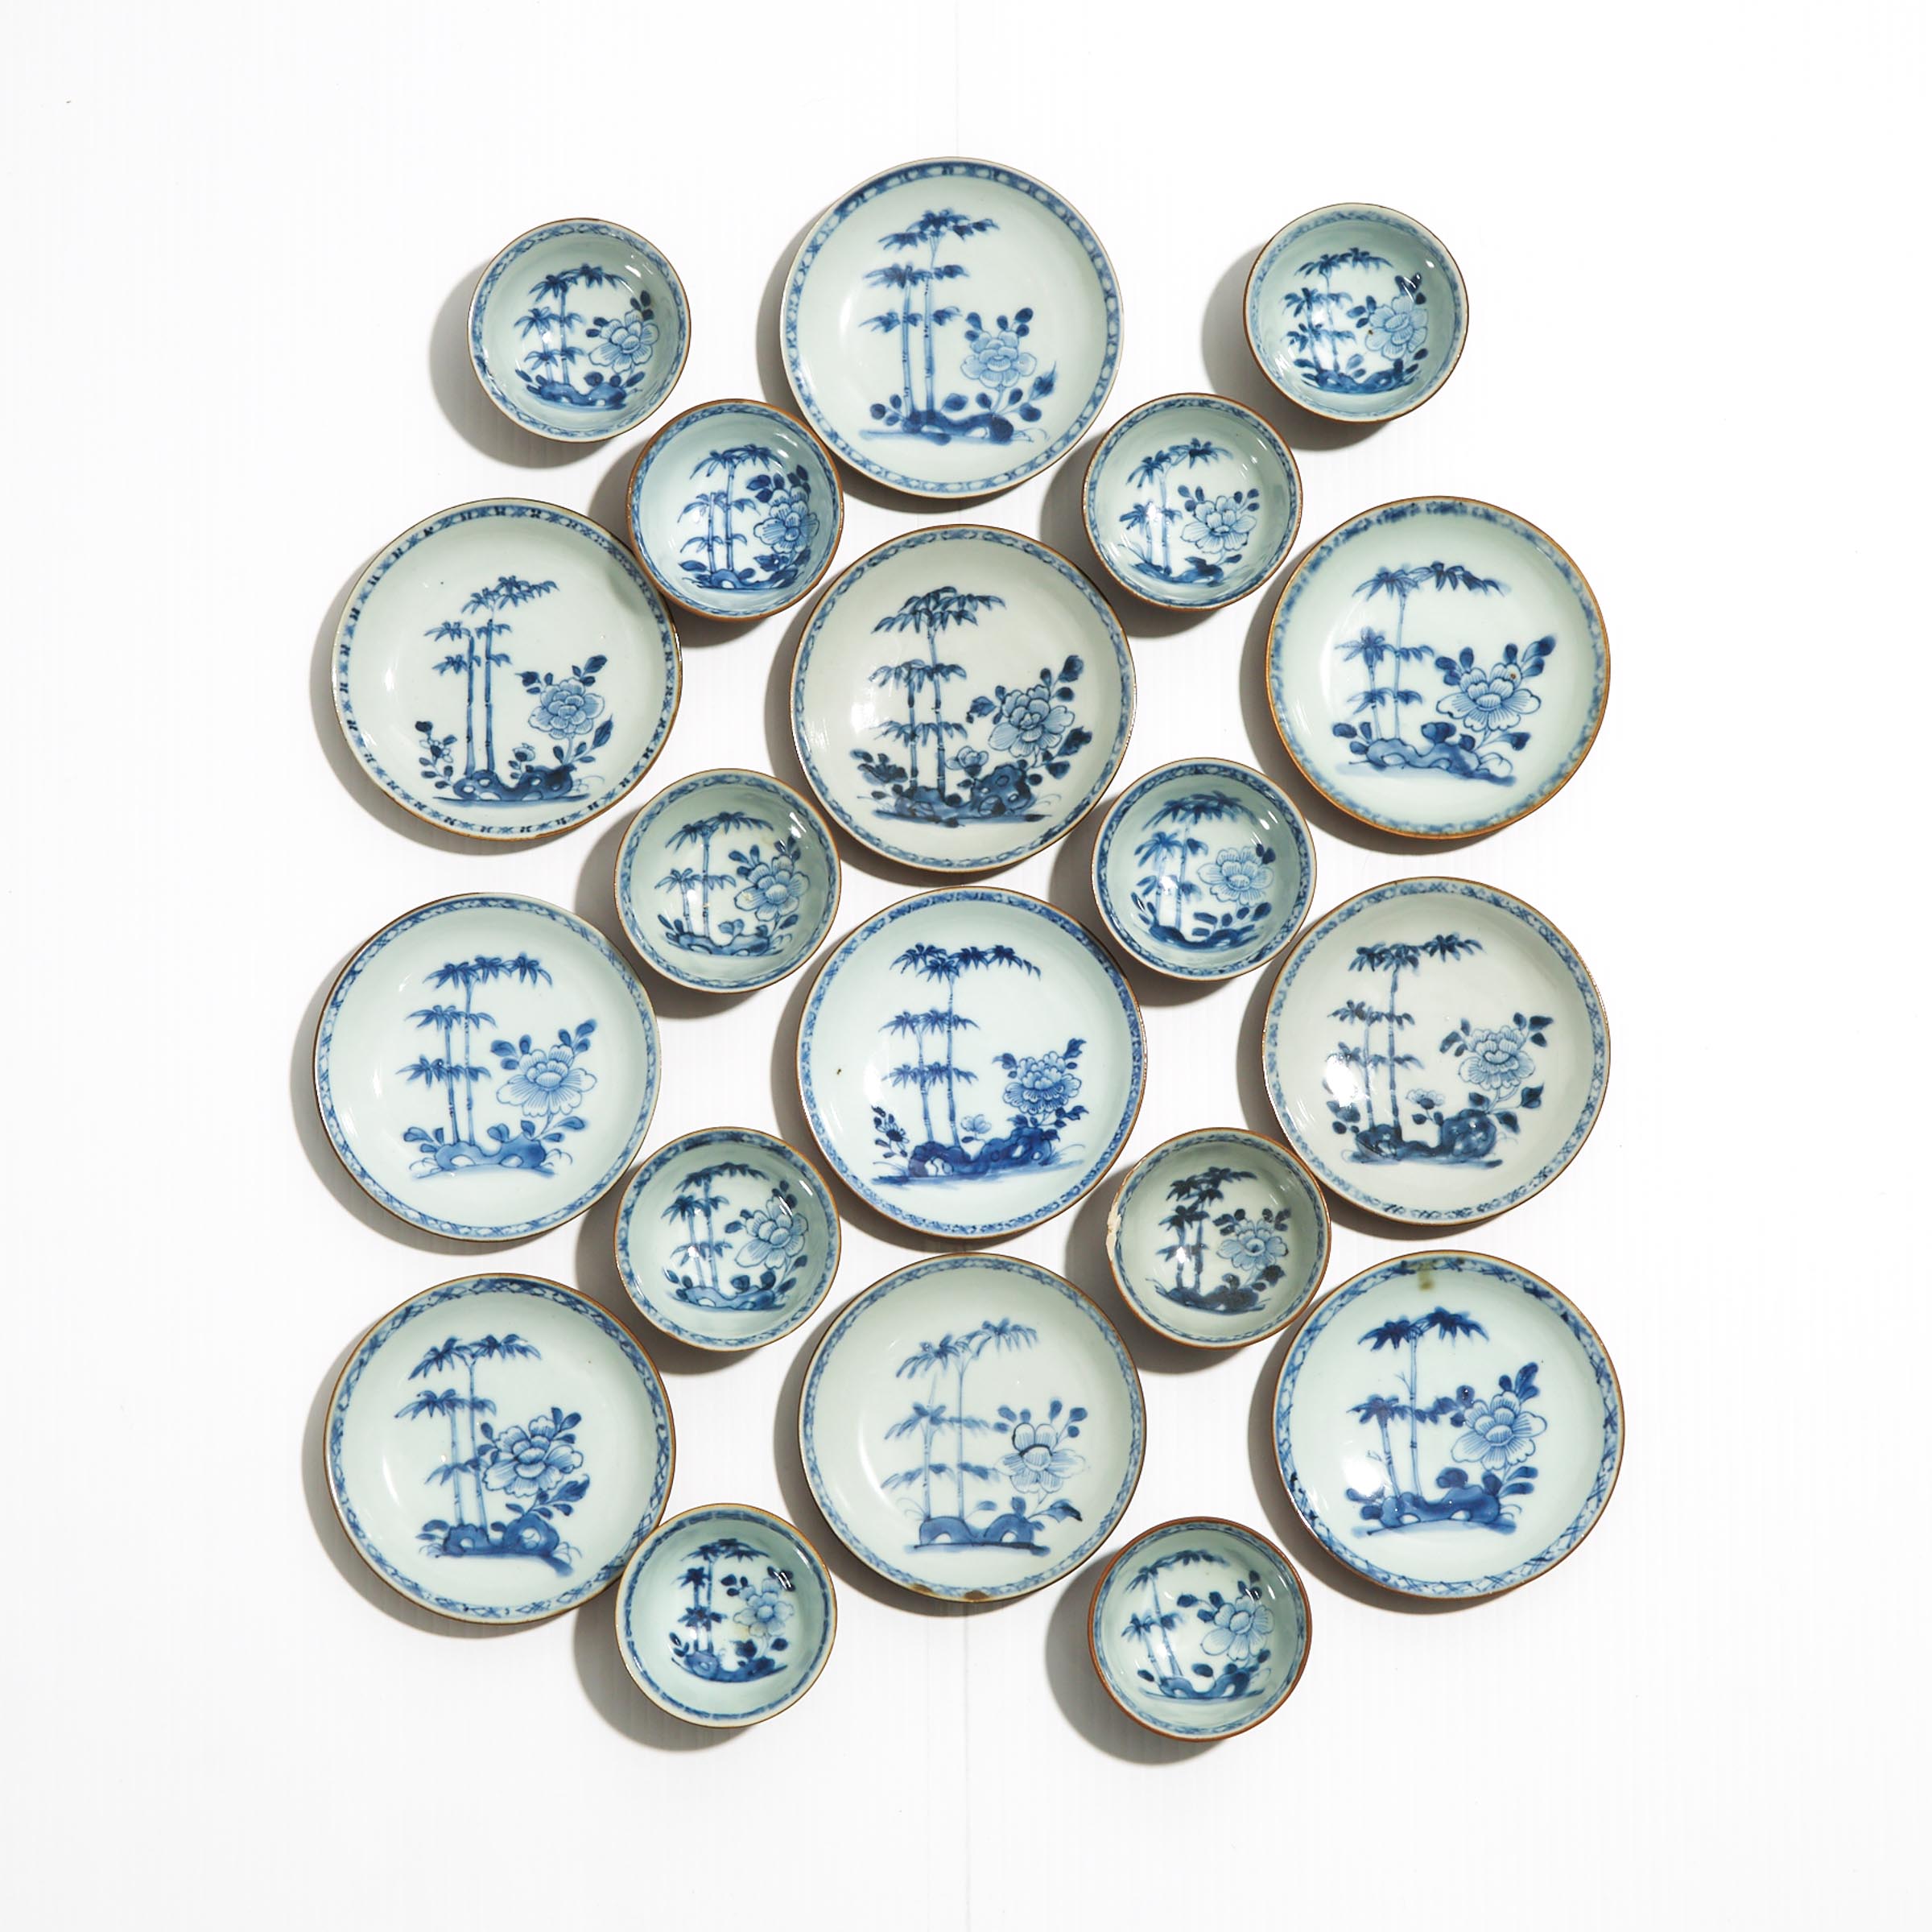 A Set of Twenty 'Batavian Bamboo and Peony' Pattern Teabowls and Saucers from the Nanking Cargo, Qianlong Period, Circa 1750